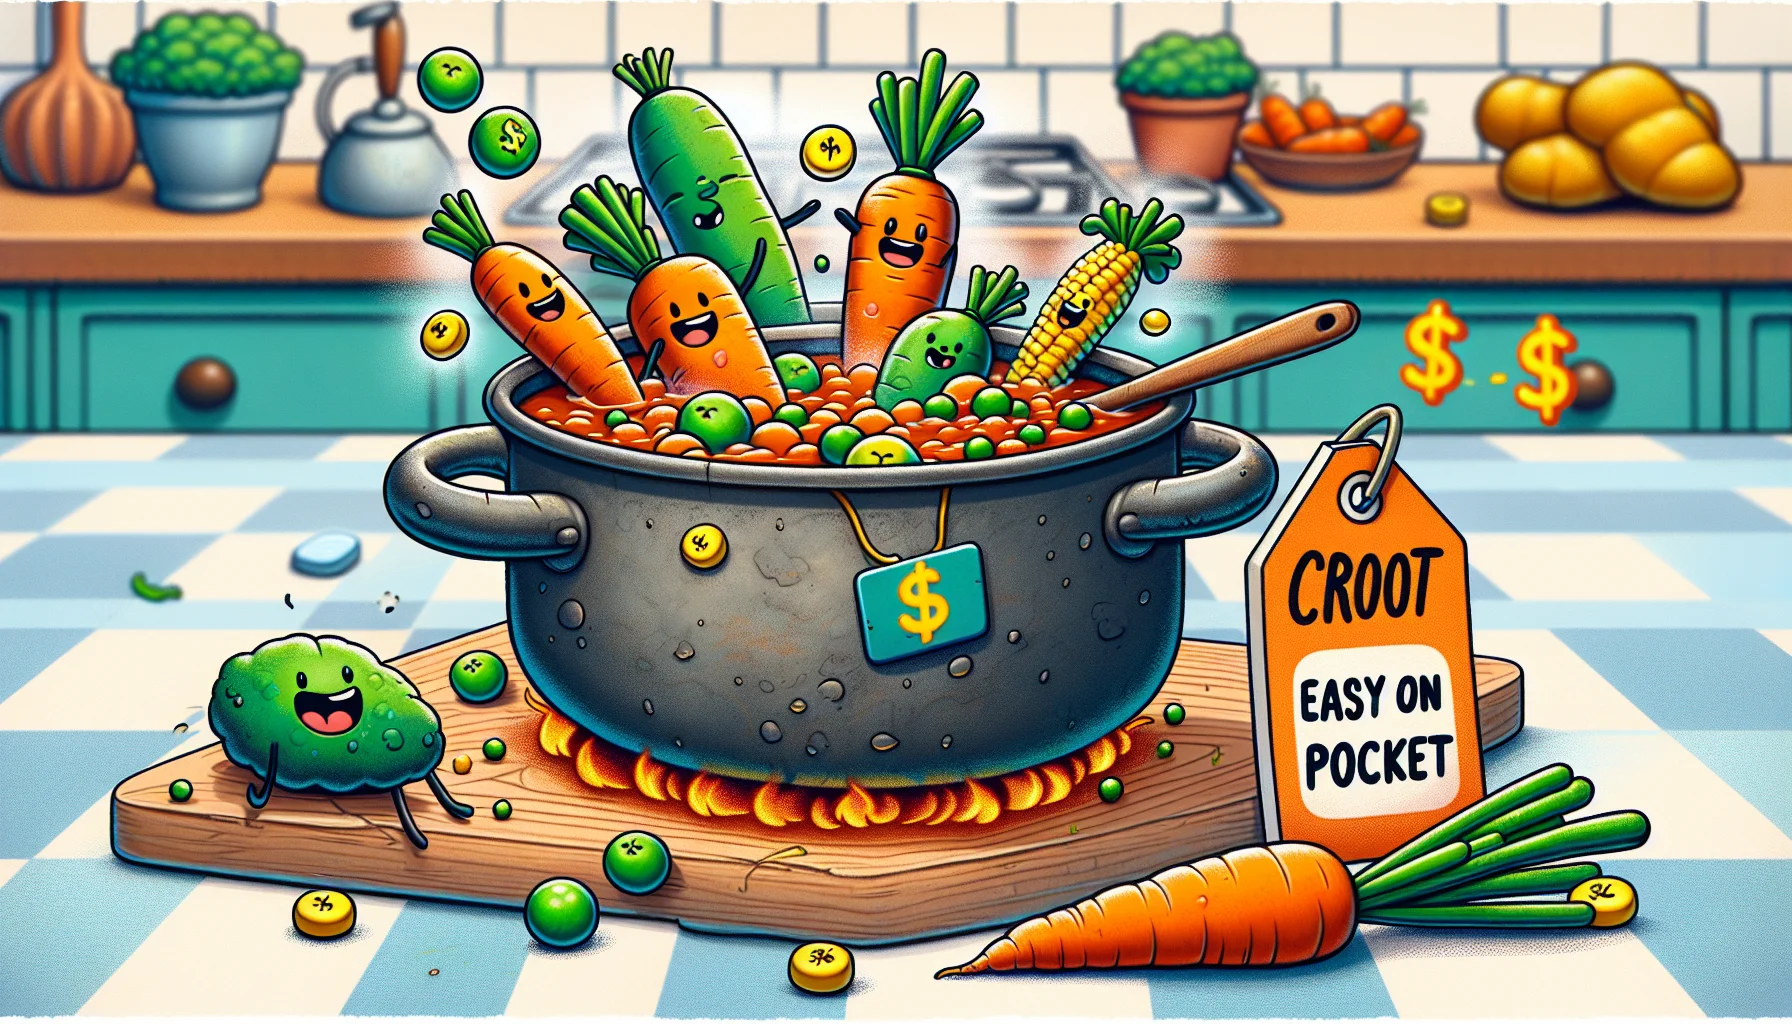 Illustrate a comical scenario featuring a savory carrot stew bubbling in a rustic pot. In this scenario, vegetables like carrots, peas, and corn are joyfully diving into the pot, contributing to the hearty stew. Beside the pot, a stylized price tag reads '$ - Easy on pocket'. All this happen on a chequered countertop in a bright, welcoming kitchen. The intent is to depict the concept of eating healthily for less money in a fun and lighthearted manner.